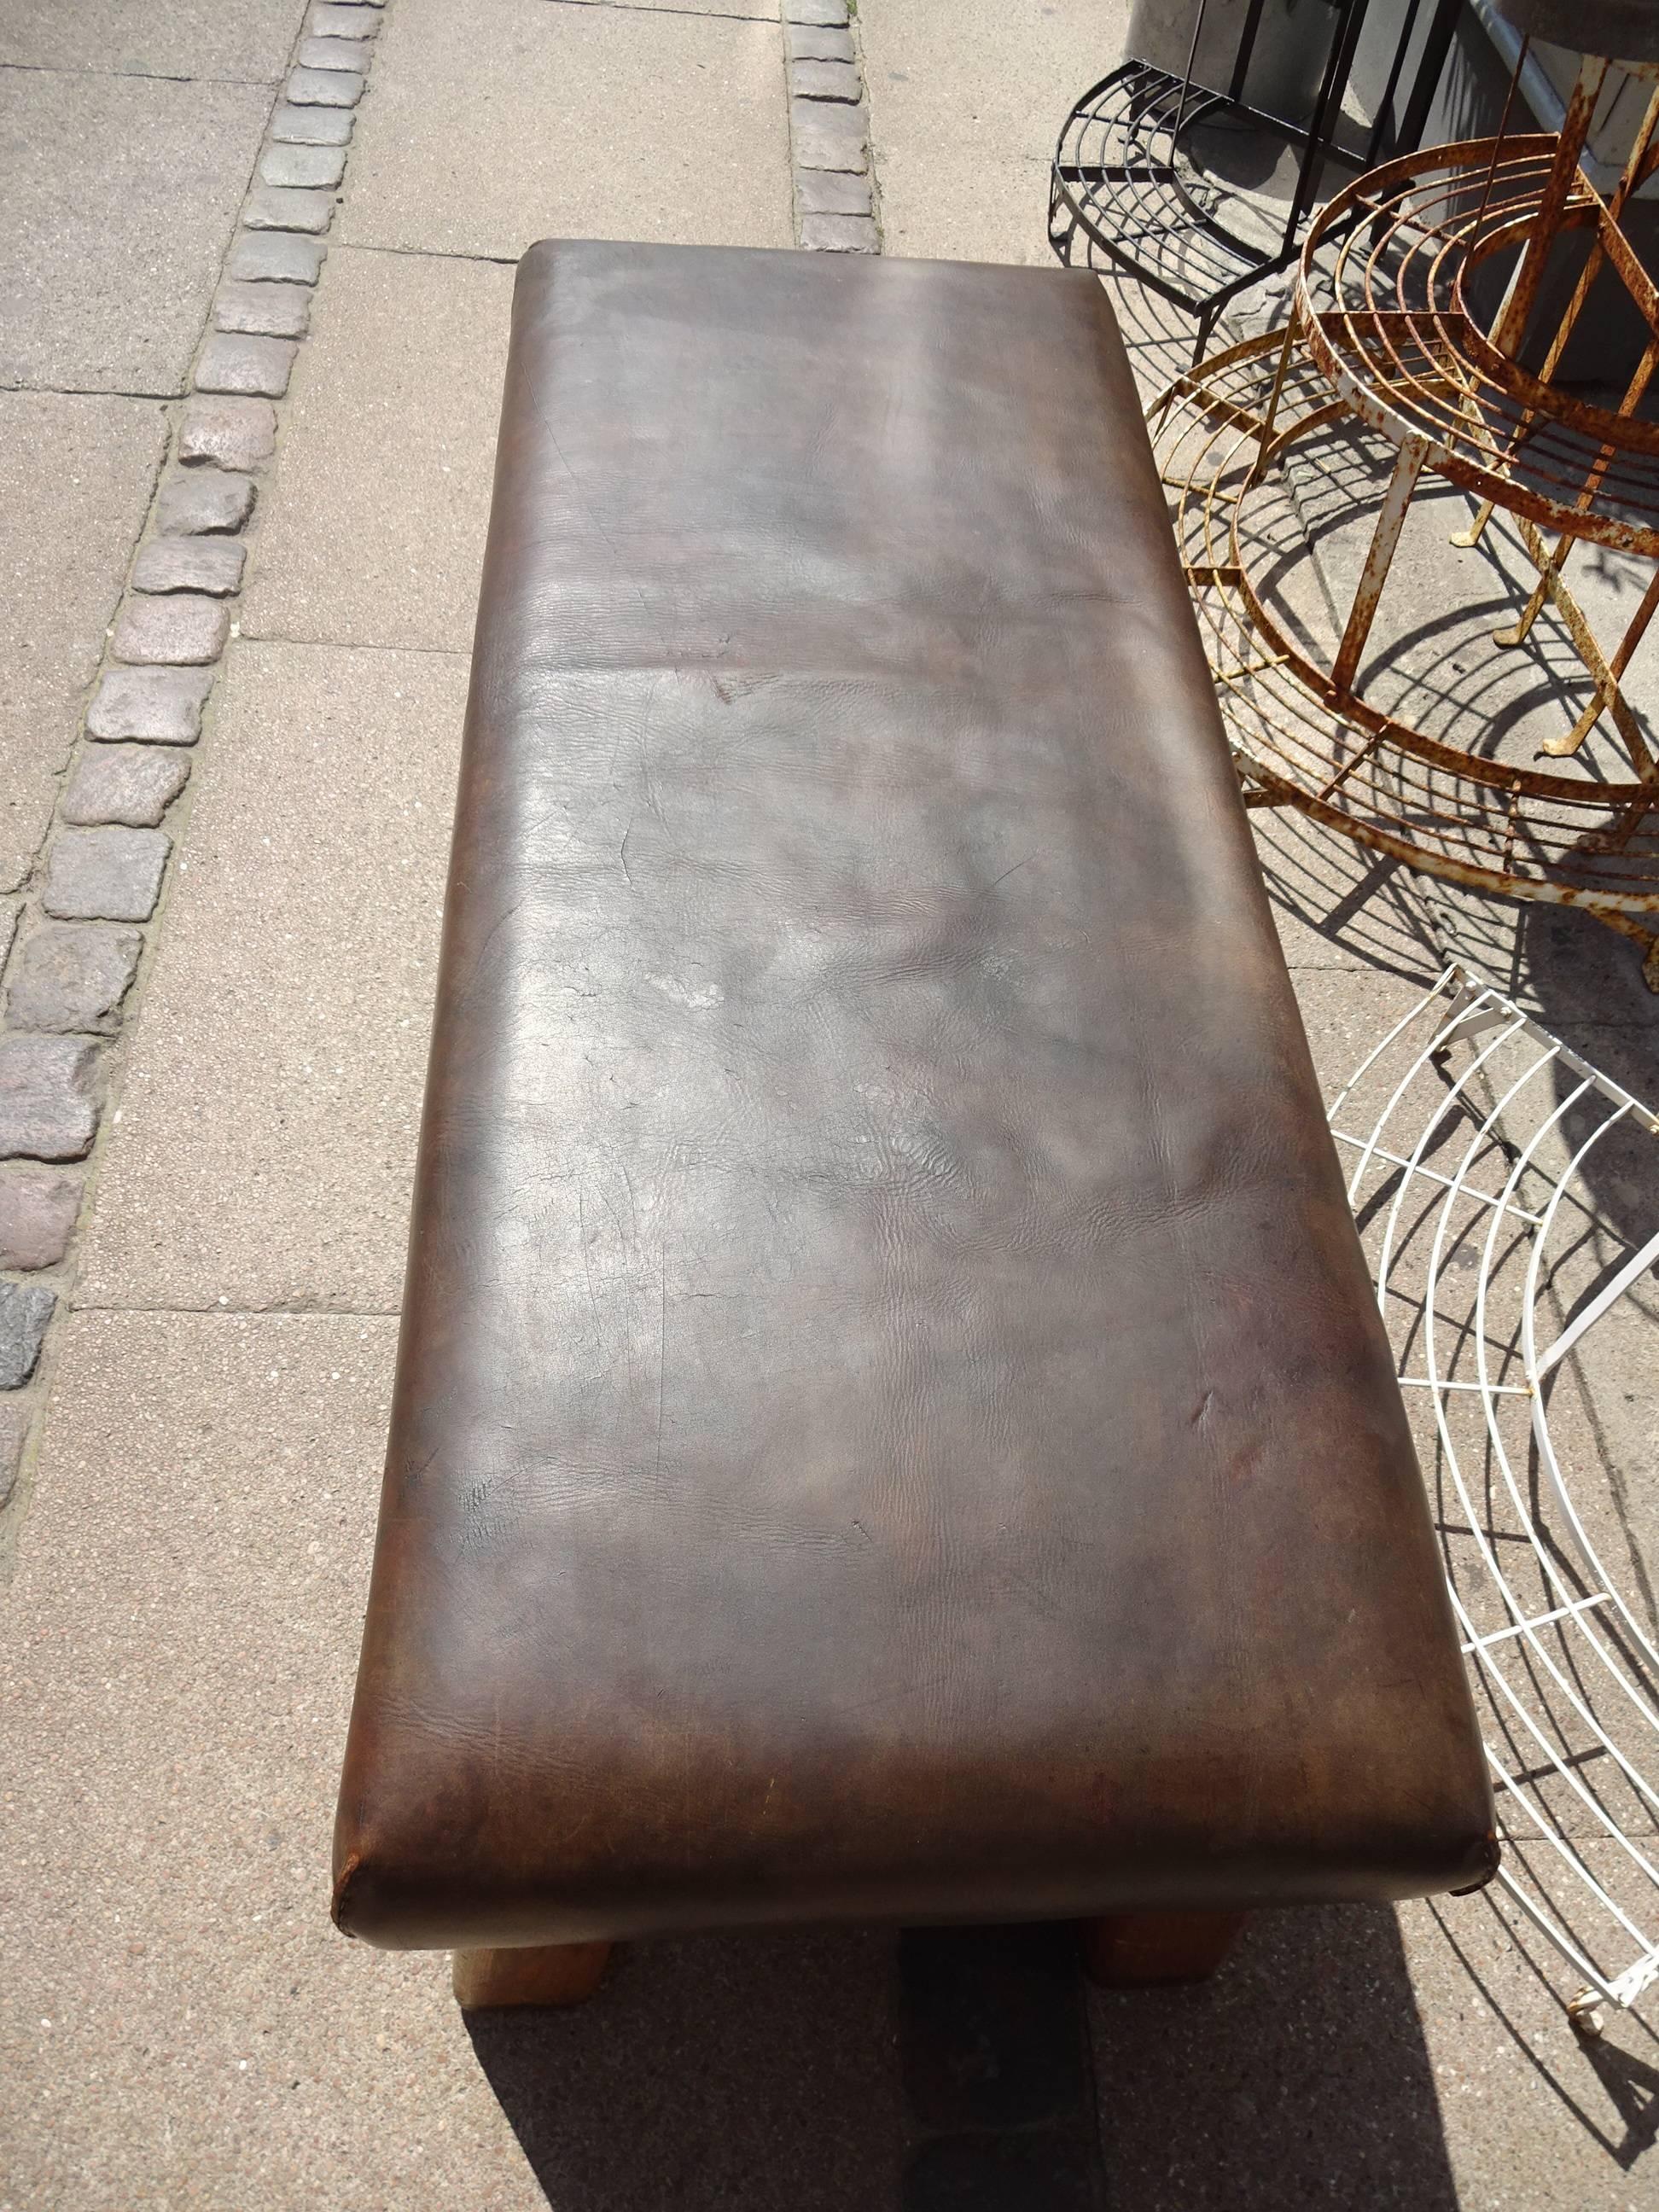 Cool vintage French dark leather bench from an old gym hall wooden base. Fabulous as bench, coffee table, gallery seating or in a boutique.

